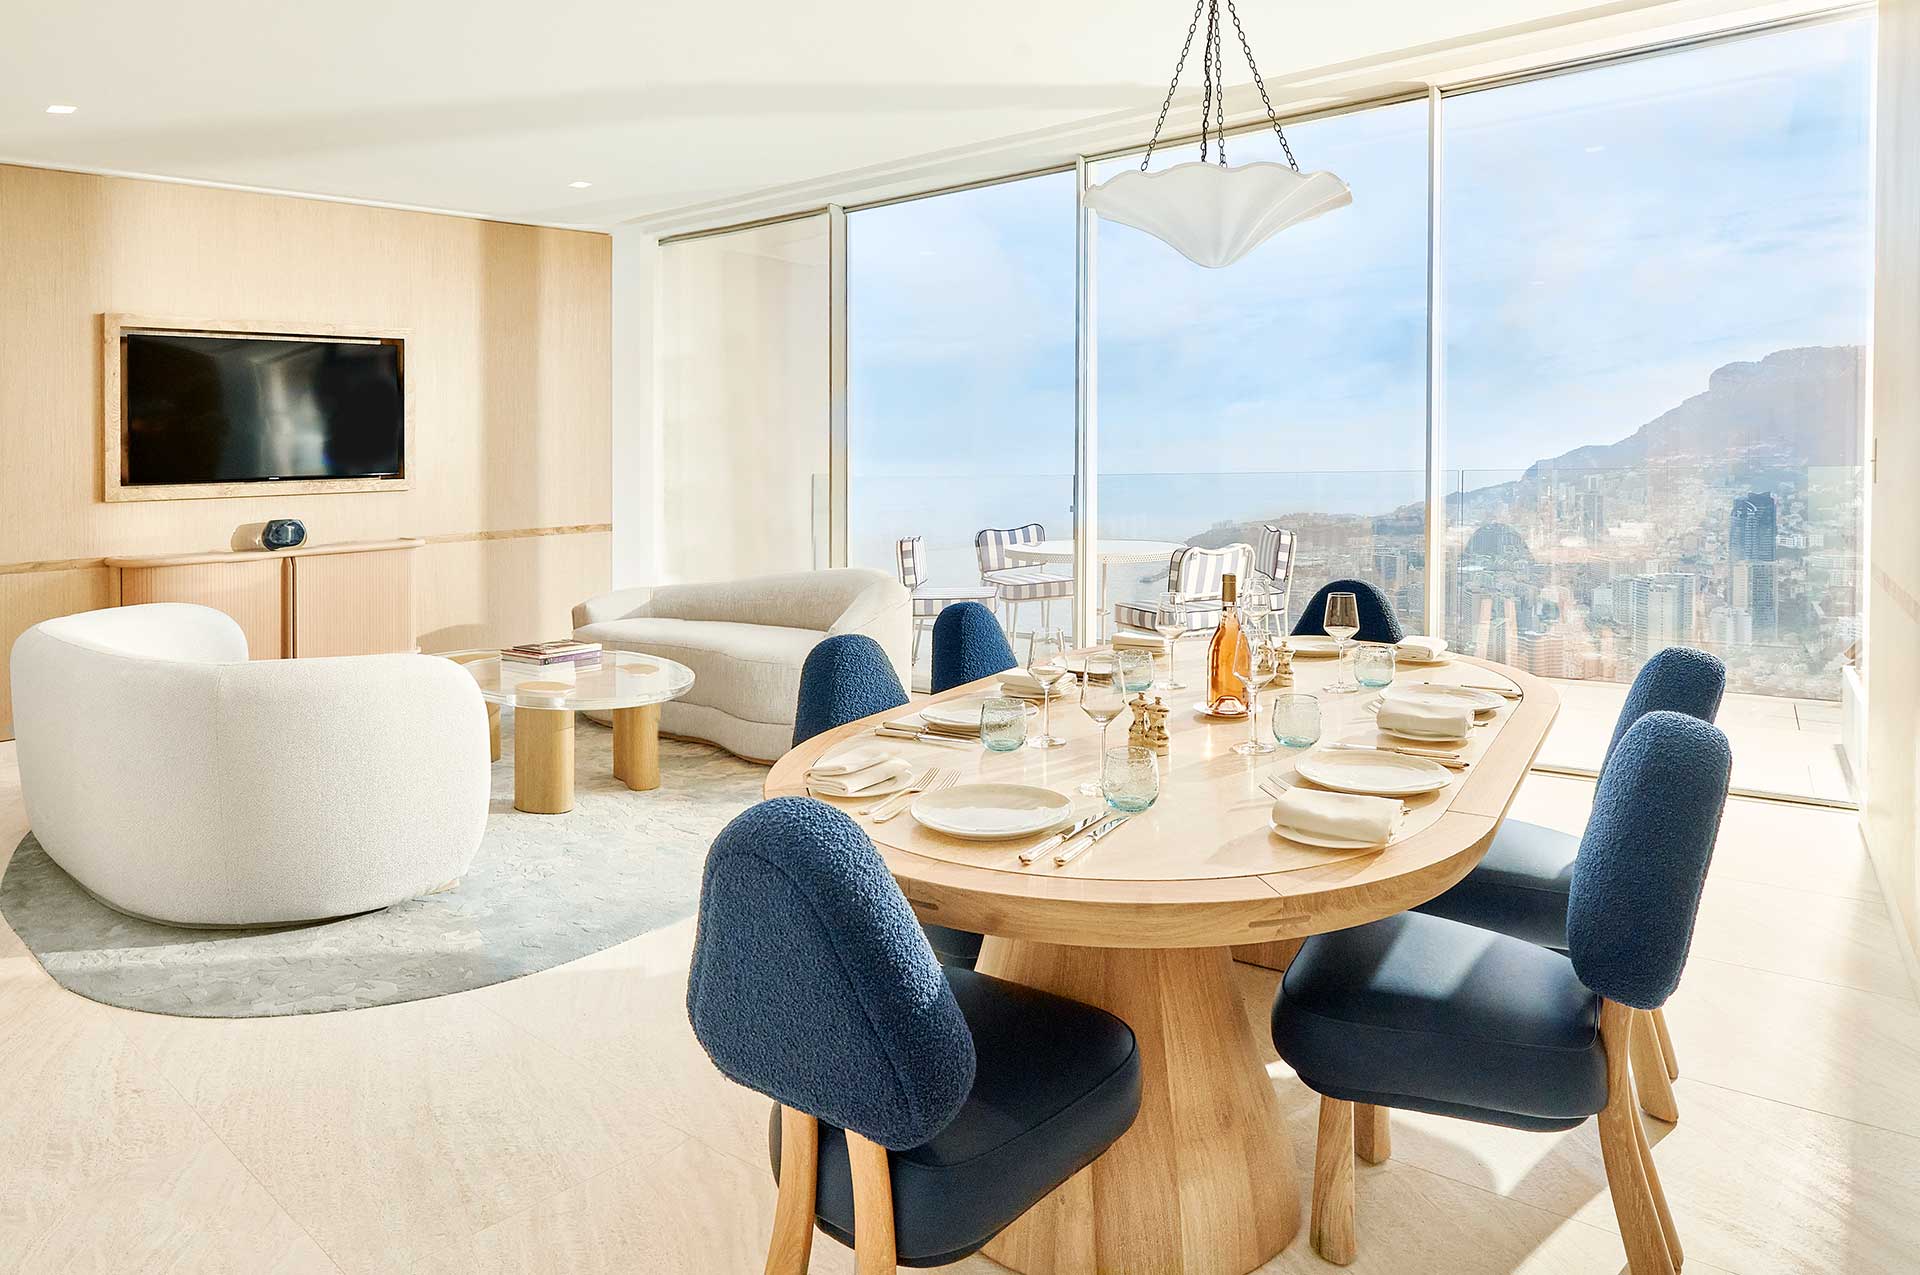 The Sea View Suite lounge features curved white plush sofas, a long wooden dining table surrounded by modern blue chairs all overlooking panoramic views of Monaco from the balcony